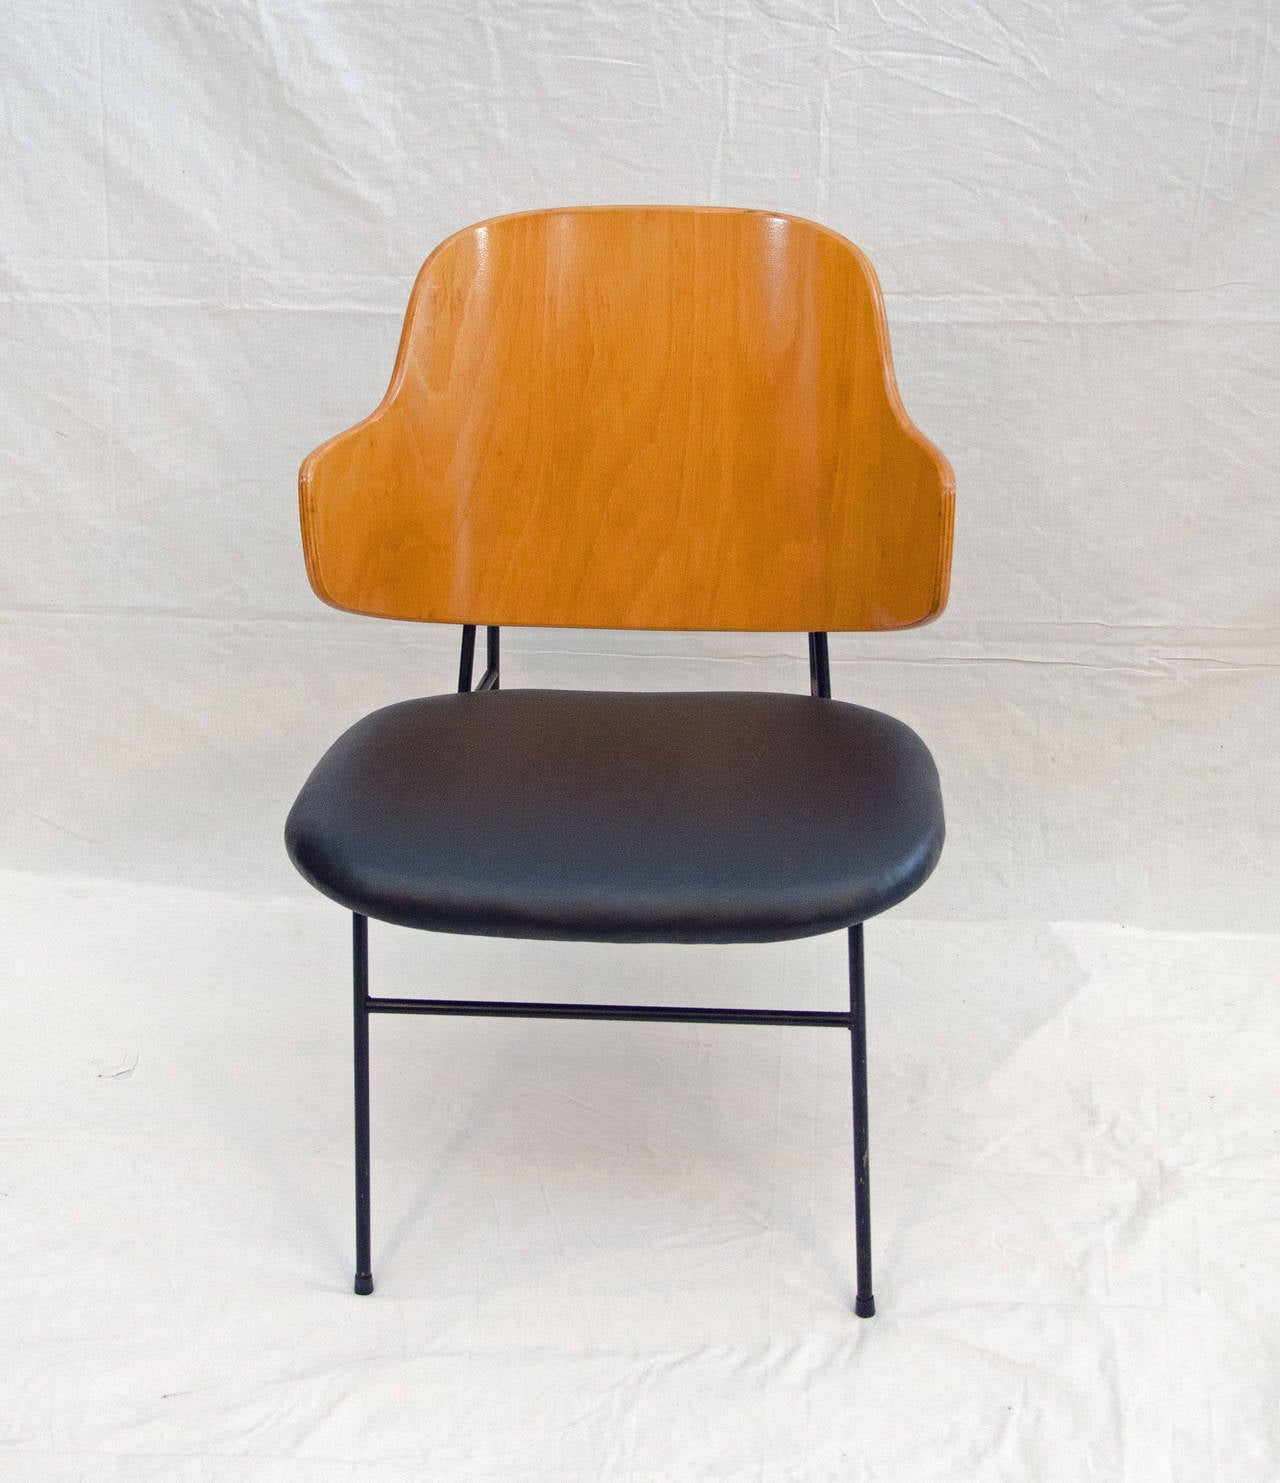 Comfortable smaller scale lounge chair, would be a nice accent for your mid century interior also fits in well with a more industrial  theme. Iron frame supports the bent birch ply curved back and the black vinyl seat.